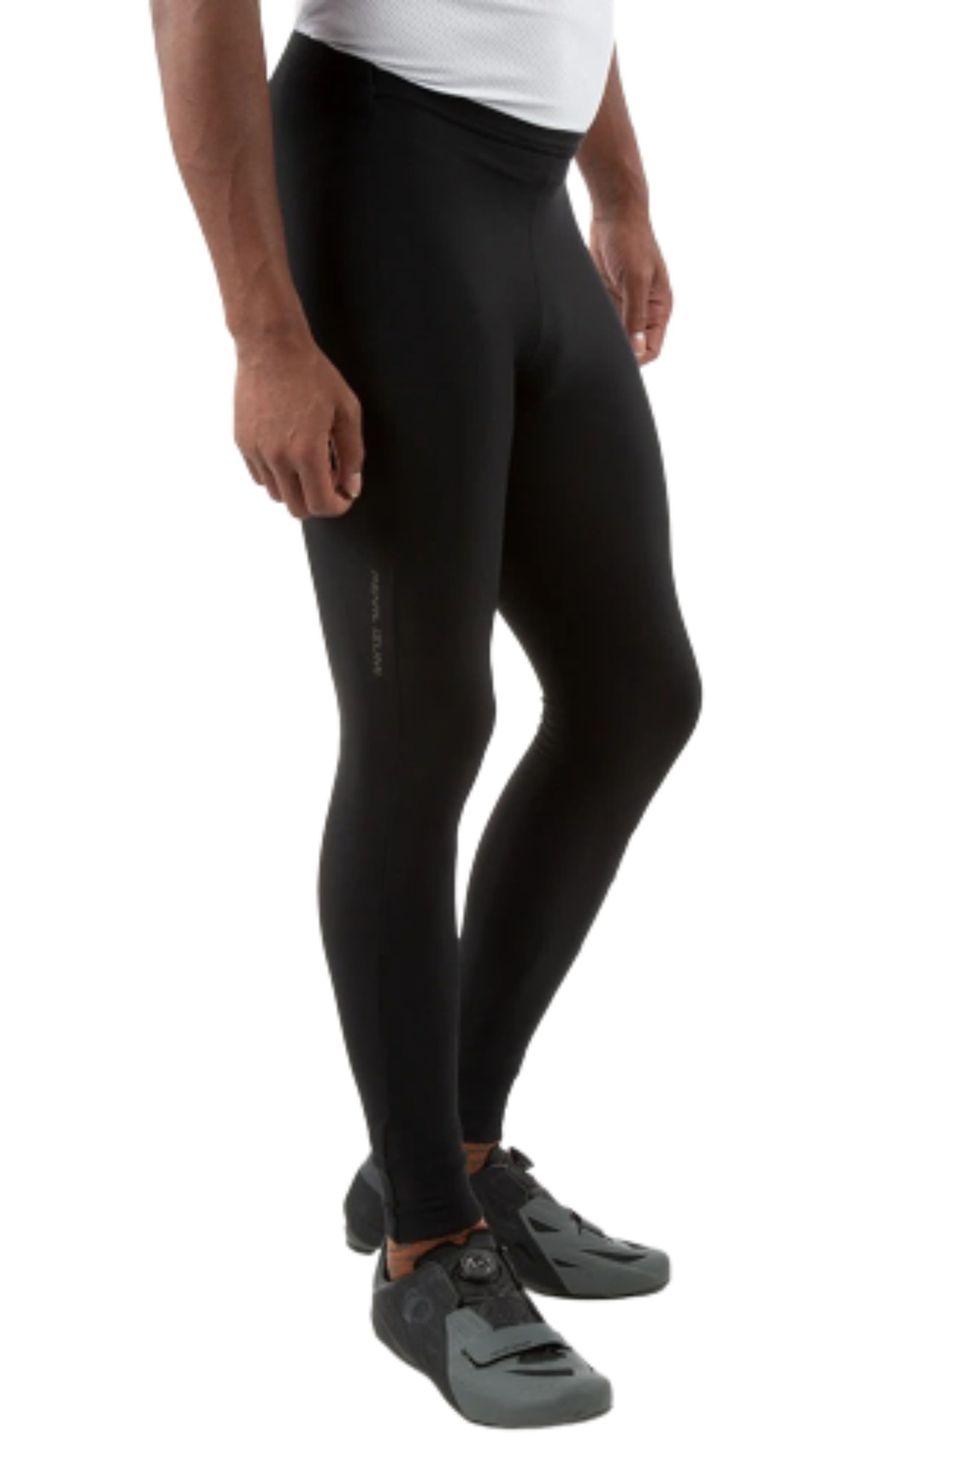 Momentum Thermal Mens Breathable Winter Running Tights Black